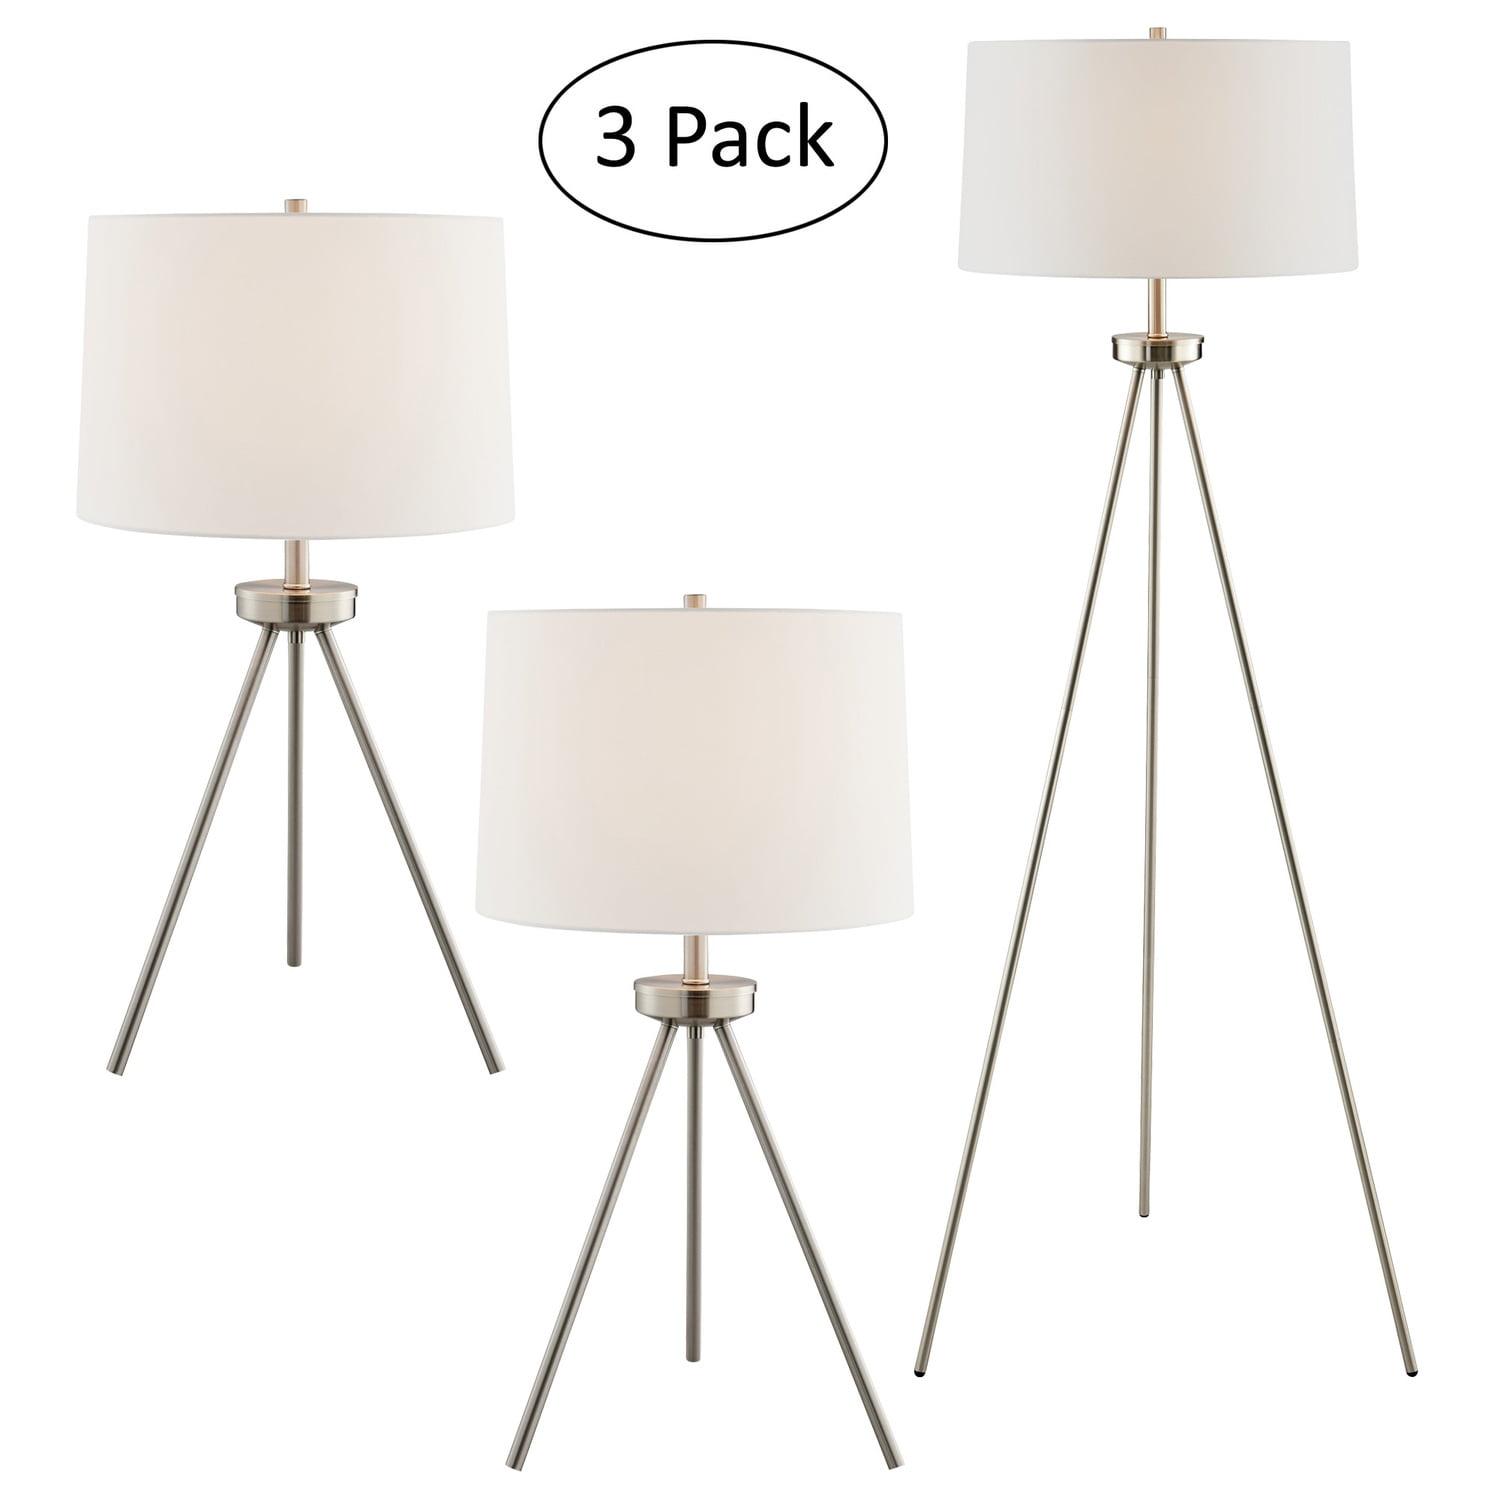 Contemporary Brushed Nickel Tripod Floor & Table Lamp Set